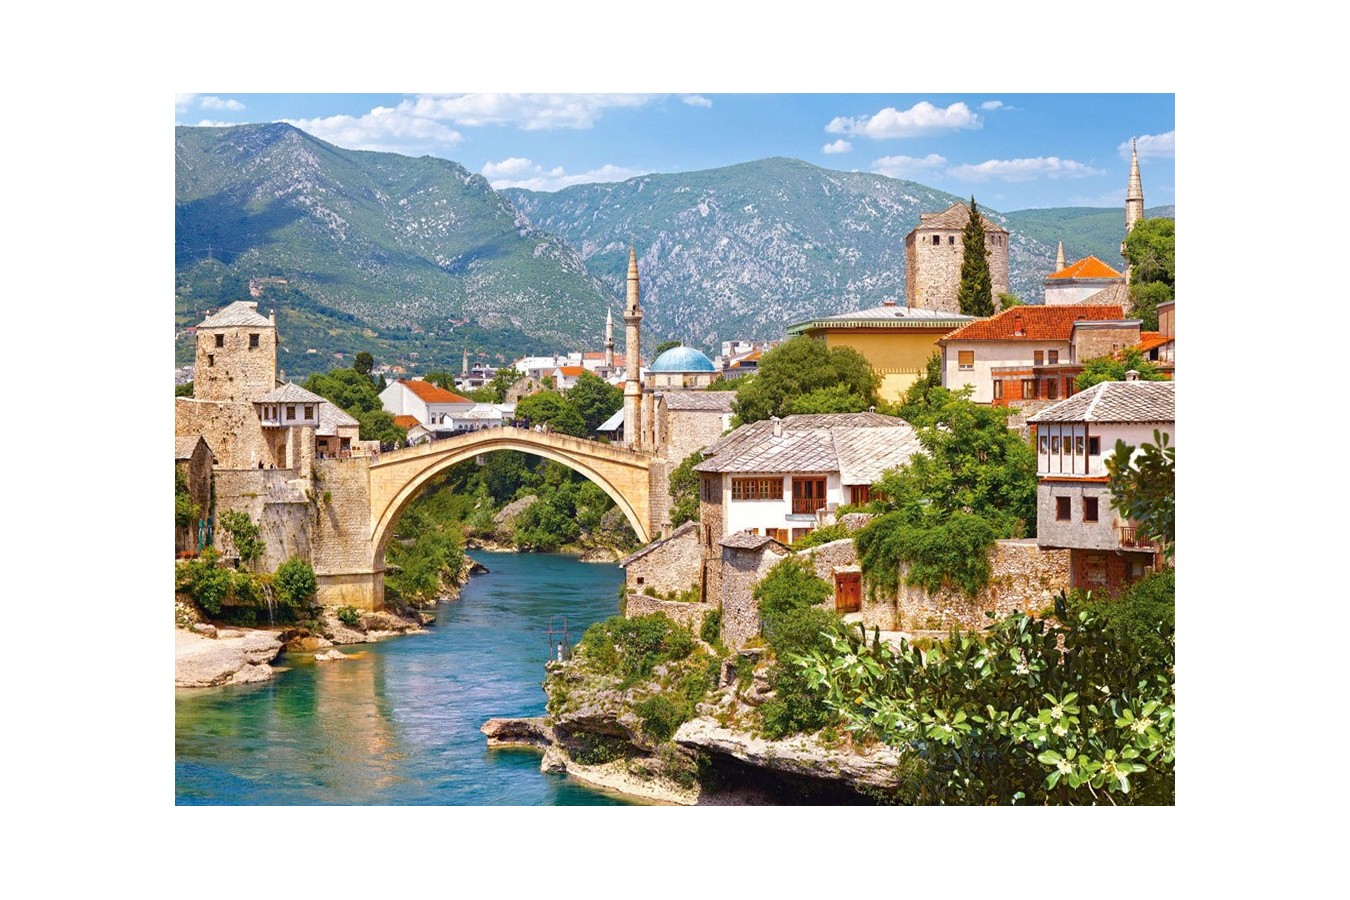 Puzzle Castorland - Mostar, Bosnia and Herzegowina, 1000 piese